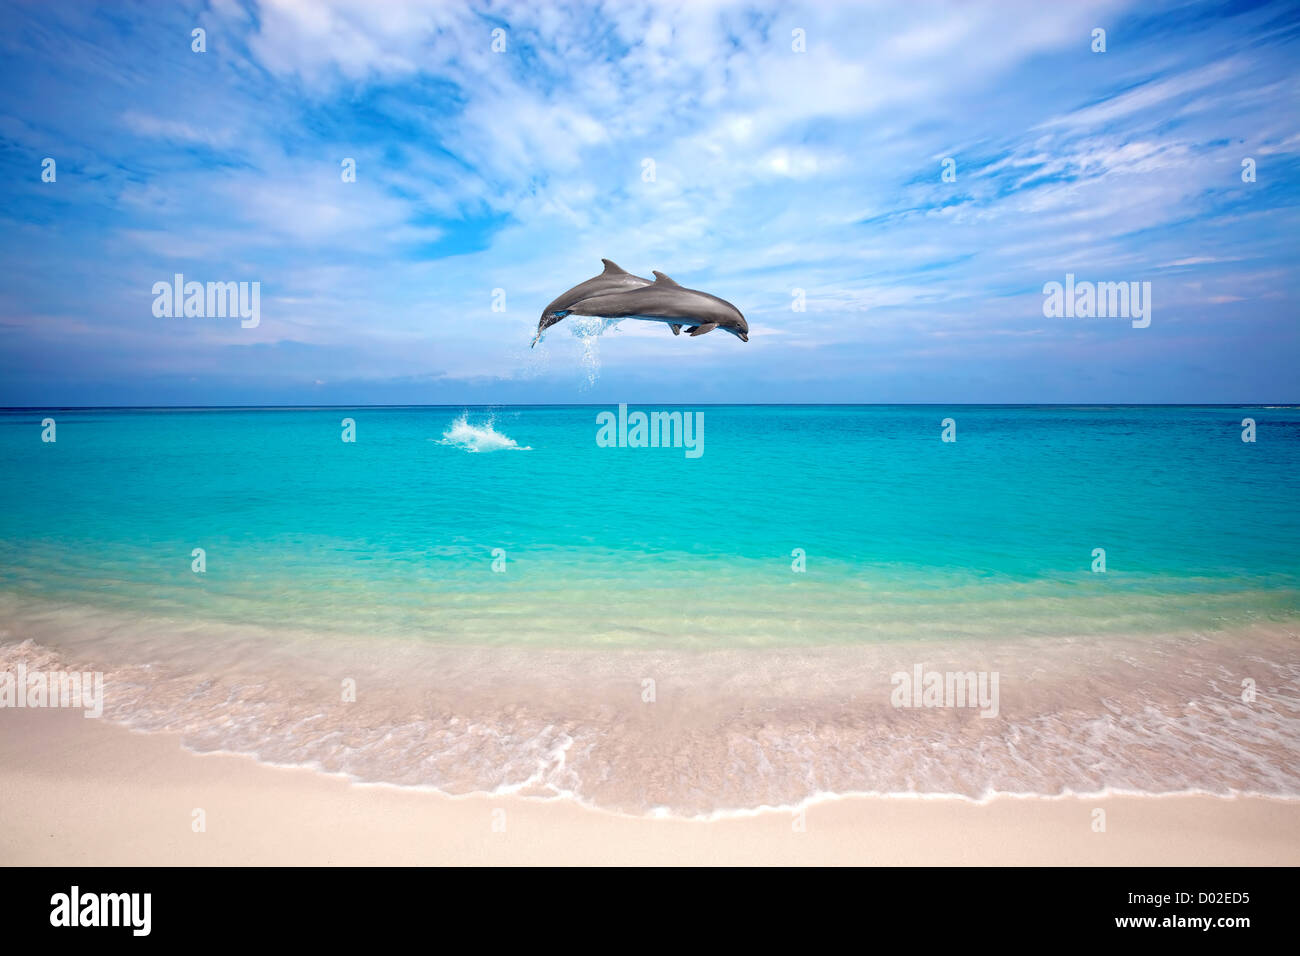 Dolphins jumping Stock Photo